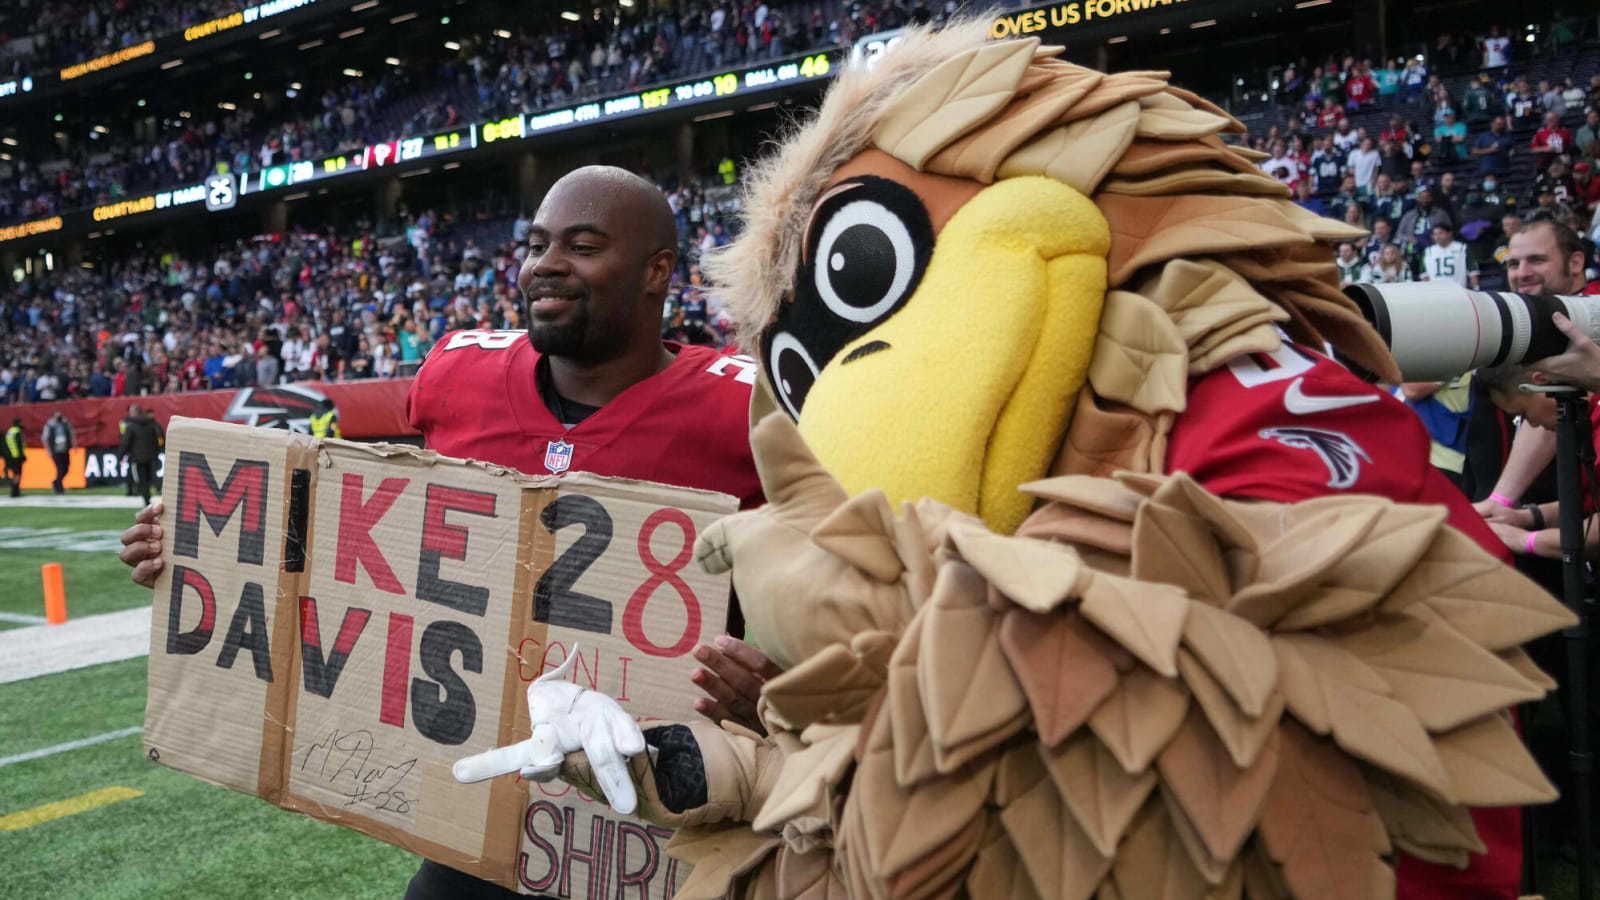 Watch: Falcons' mascot gets in shoving match with youth football player